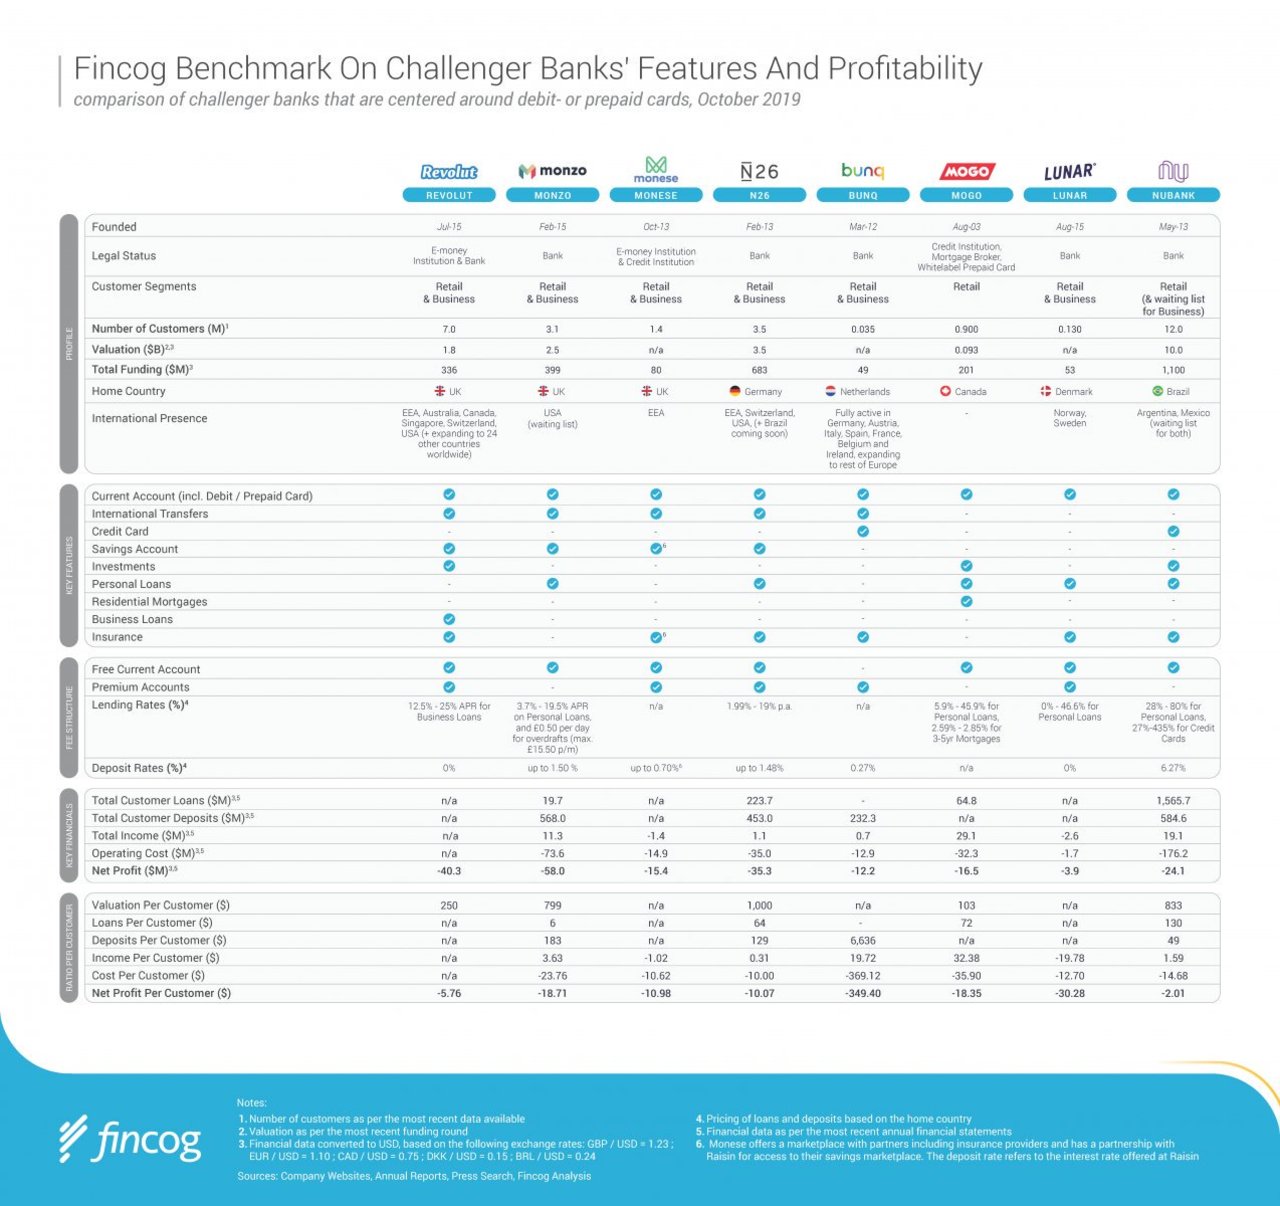 The Profitability Challenge for Challenger Banks. By @FincogNL https://www.fincog.nl/blog/15/the-profitability-challenge-for-challenger-banks #fintech #Banking #DigitalBanking #innovation  Cc: @JimMarous @Damien_CABADI @andi_staub @Xbond49 @psb_dc @TheRudinGroup @maxjcm @sbmeunier @NeiraOsci @DrJDrooghaag @andy_lucerne @FinMKTG https://t.co/I629bSx5dE